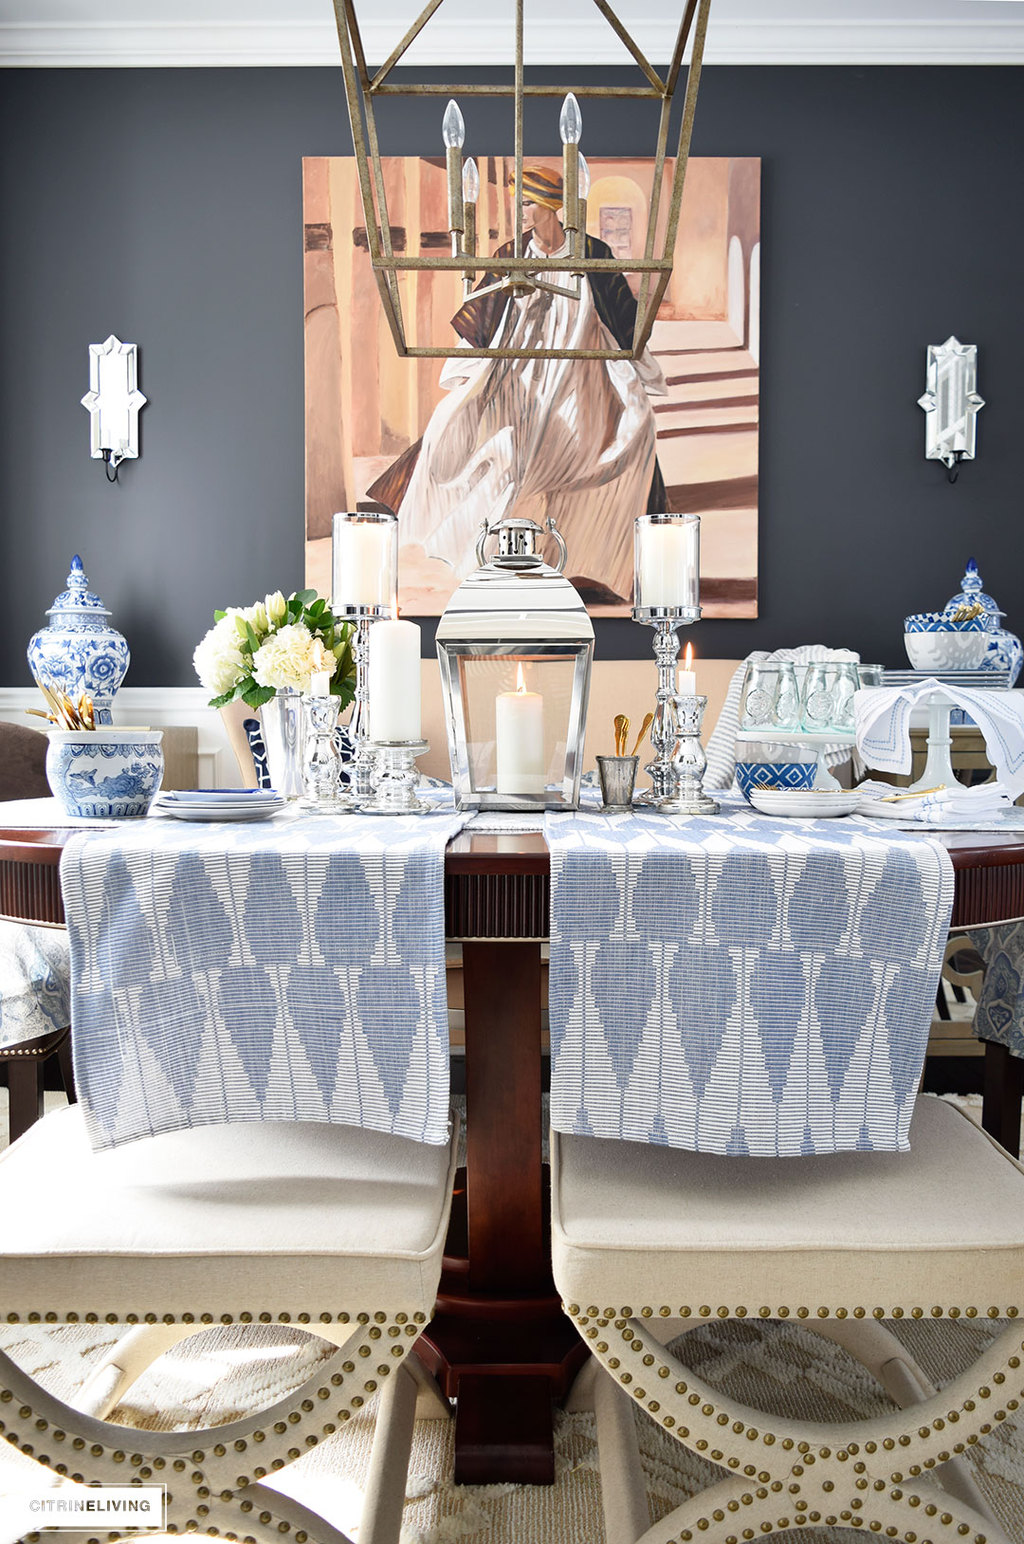 Spring decor - a fresh mix of blue and white pattern and texture is perfect for the season.